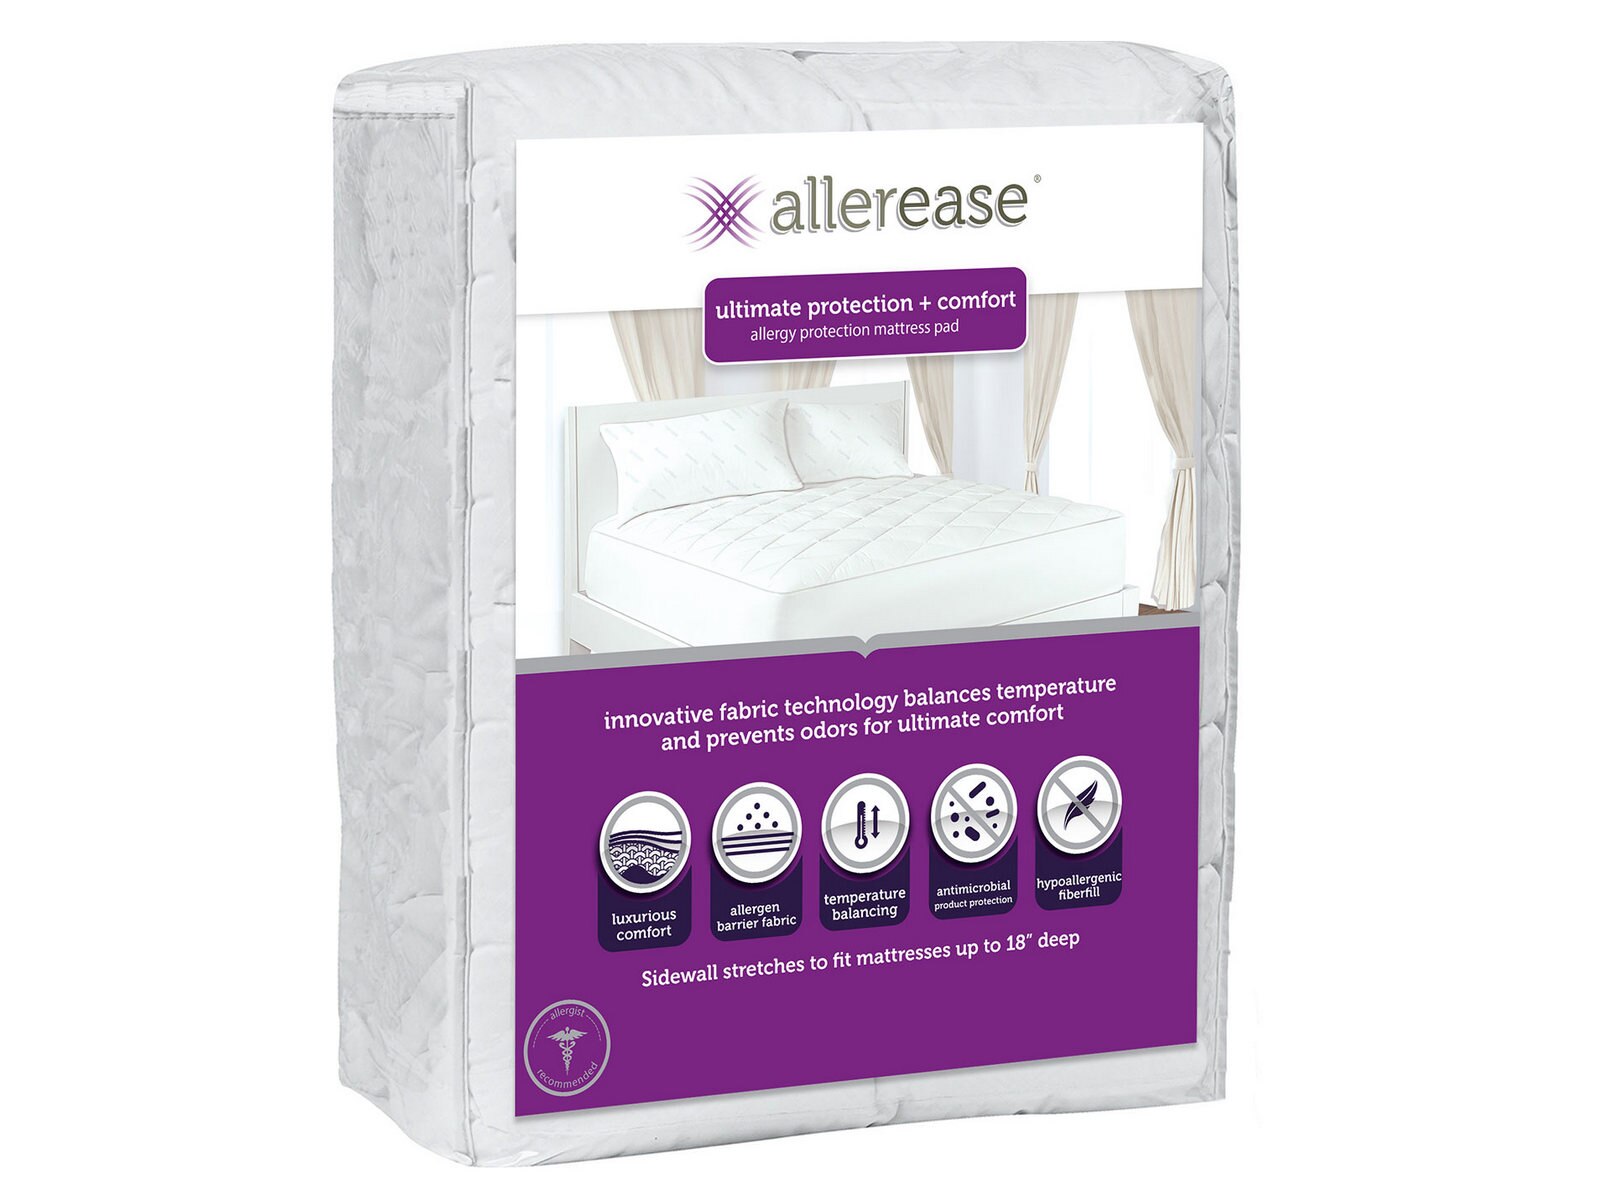 allerease ultimate mattress protector review